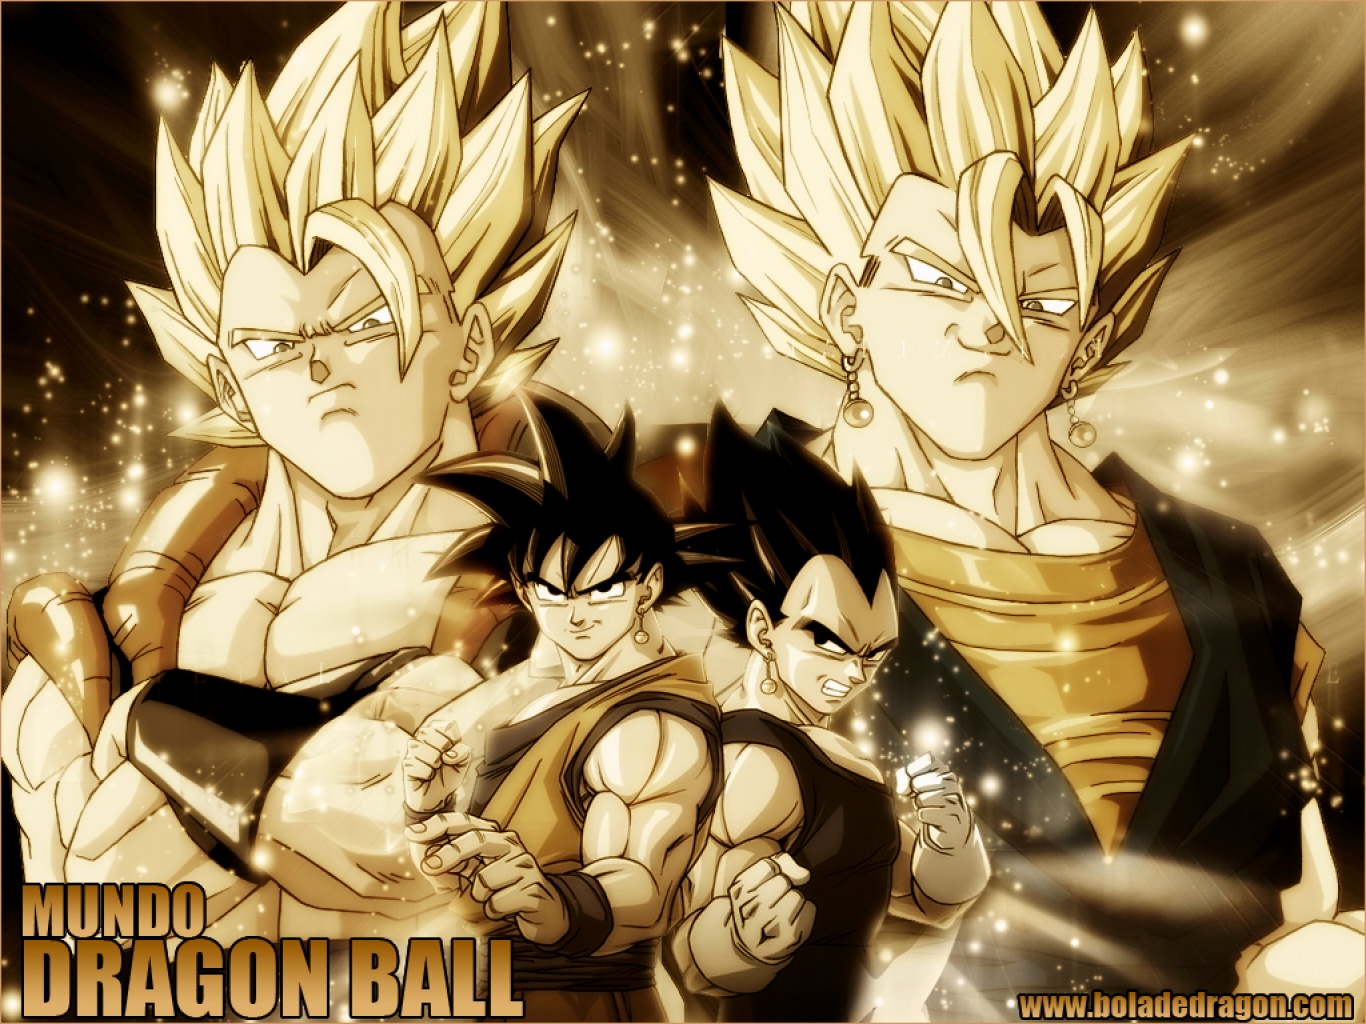 Goku, Vegeta, Vegetto, and Gogeta (characters from Dragon Ball) standing together.